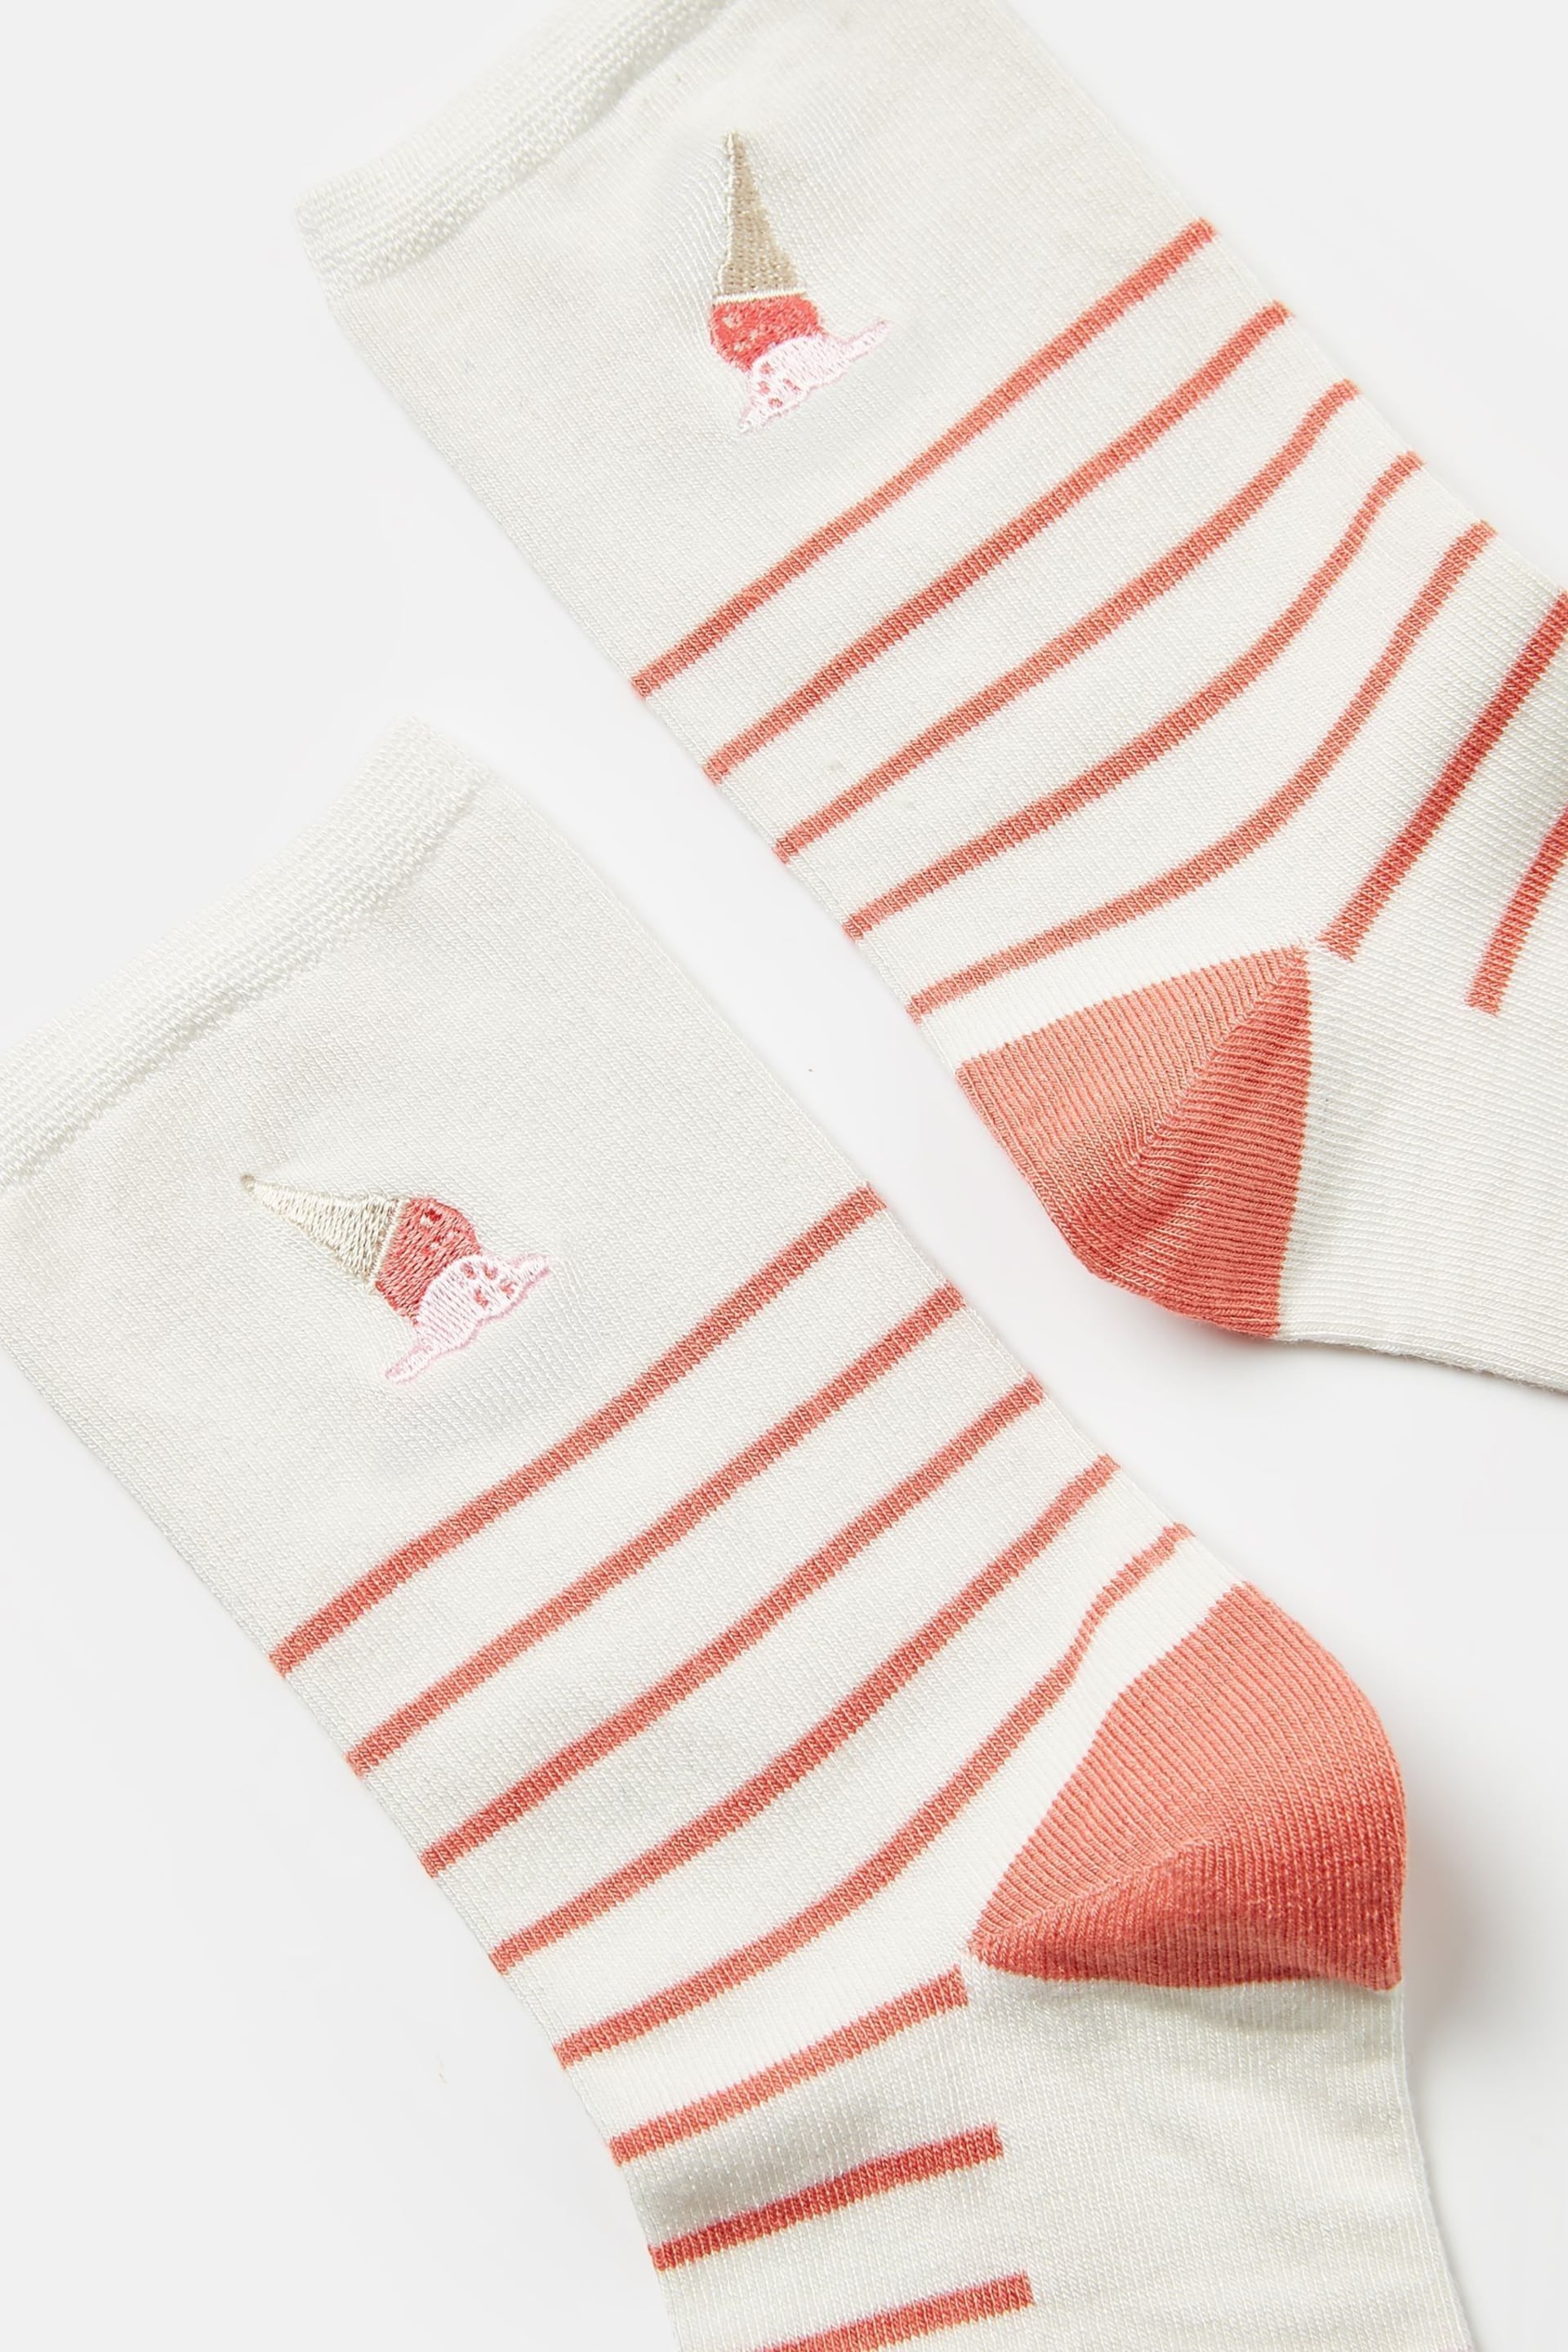 Joules Embroidered Red/White Ankle Socks - Image 2 of 3